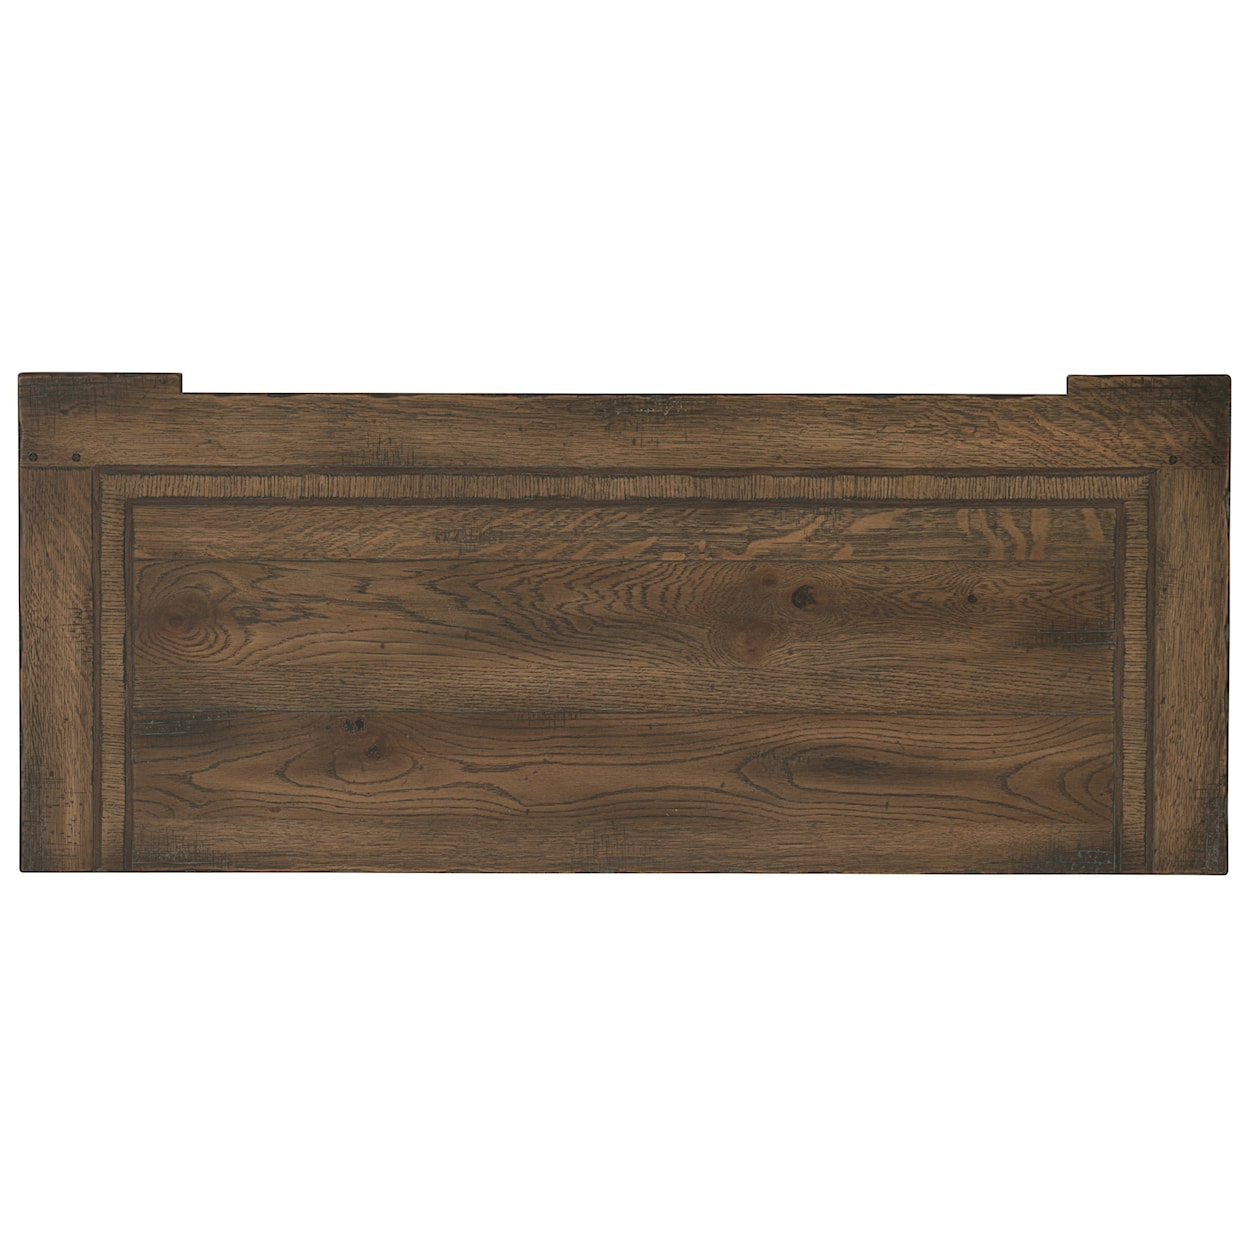 Hooker Furniture Hill Country Cypress Mill Accent Chest